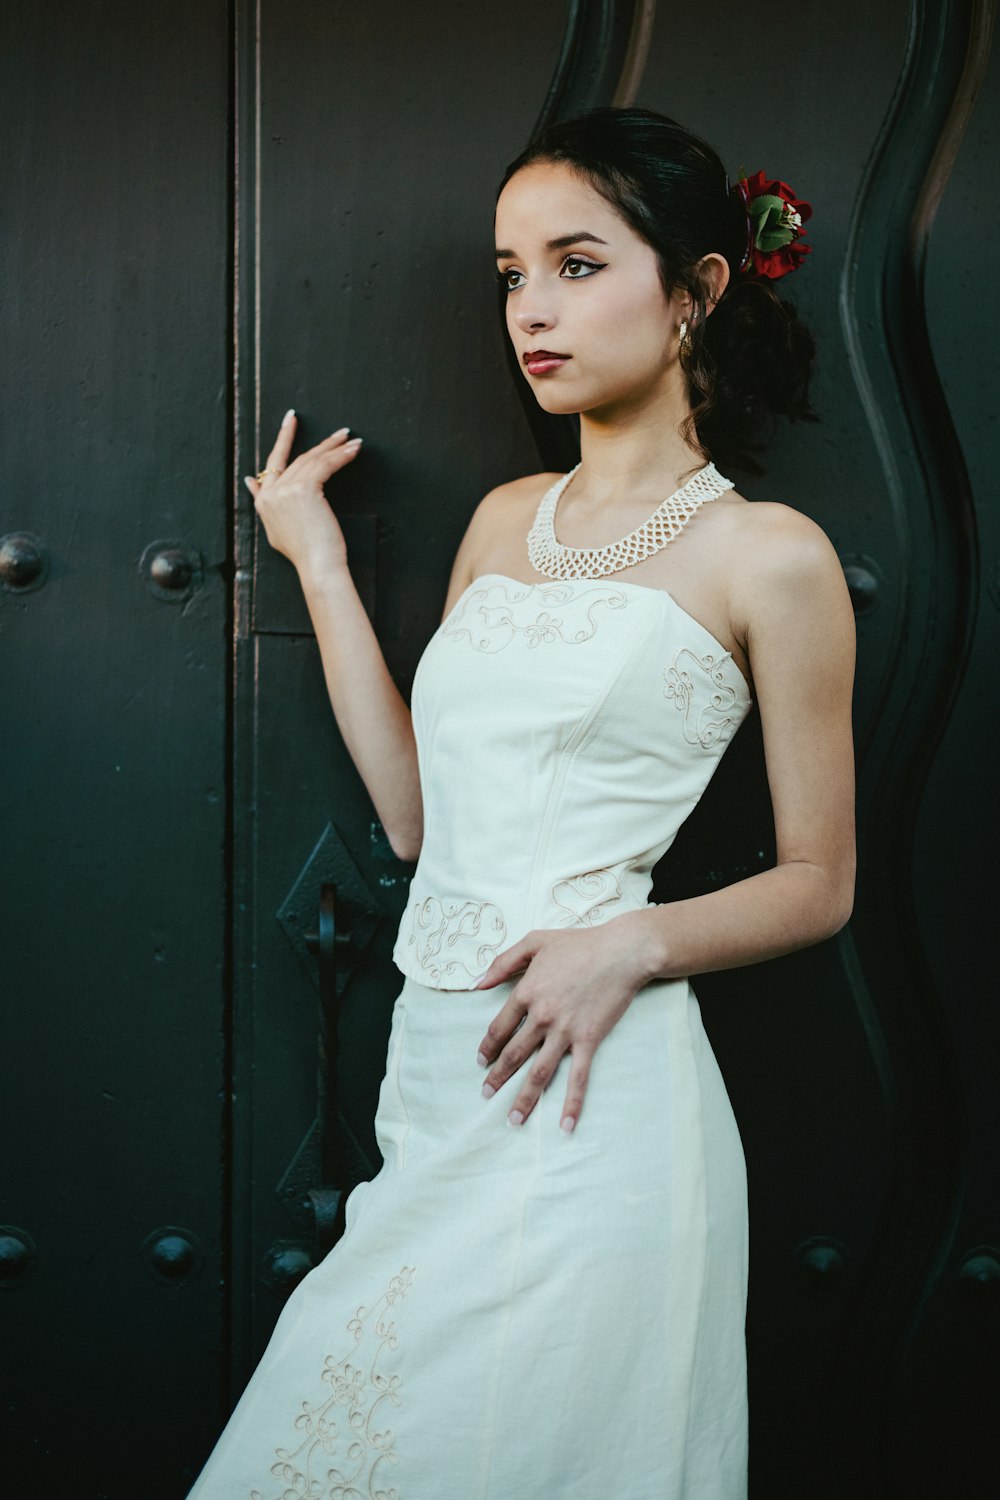 a woman in a white dress leaning against a black door